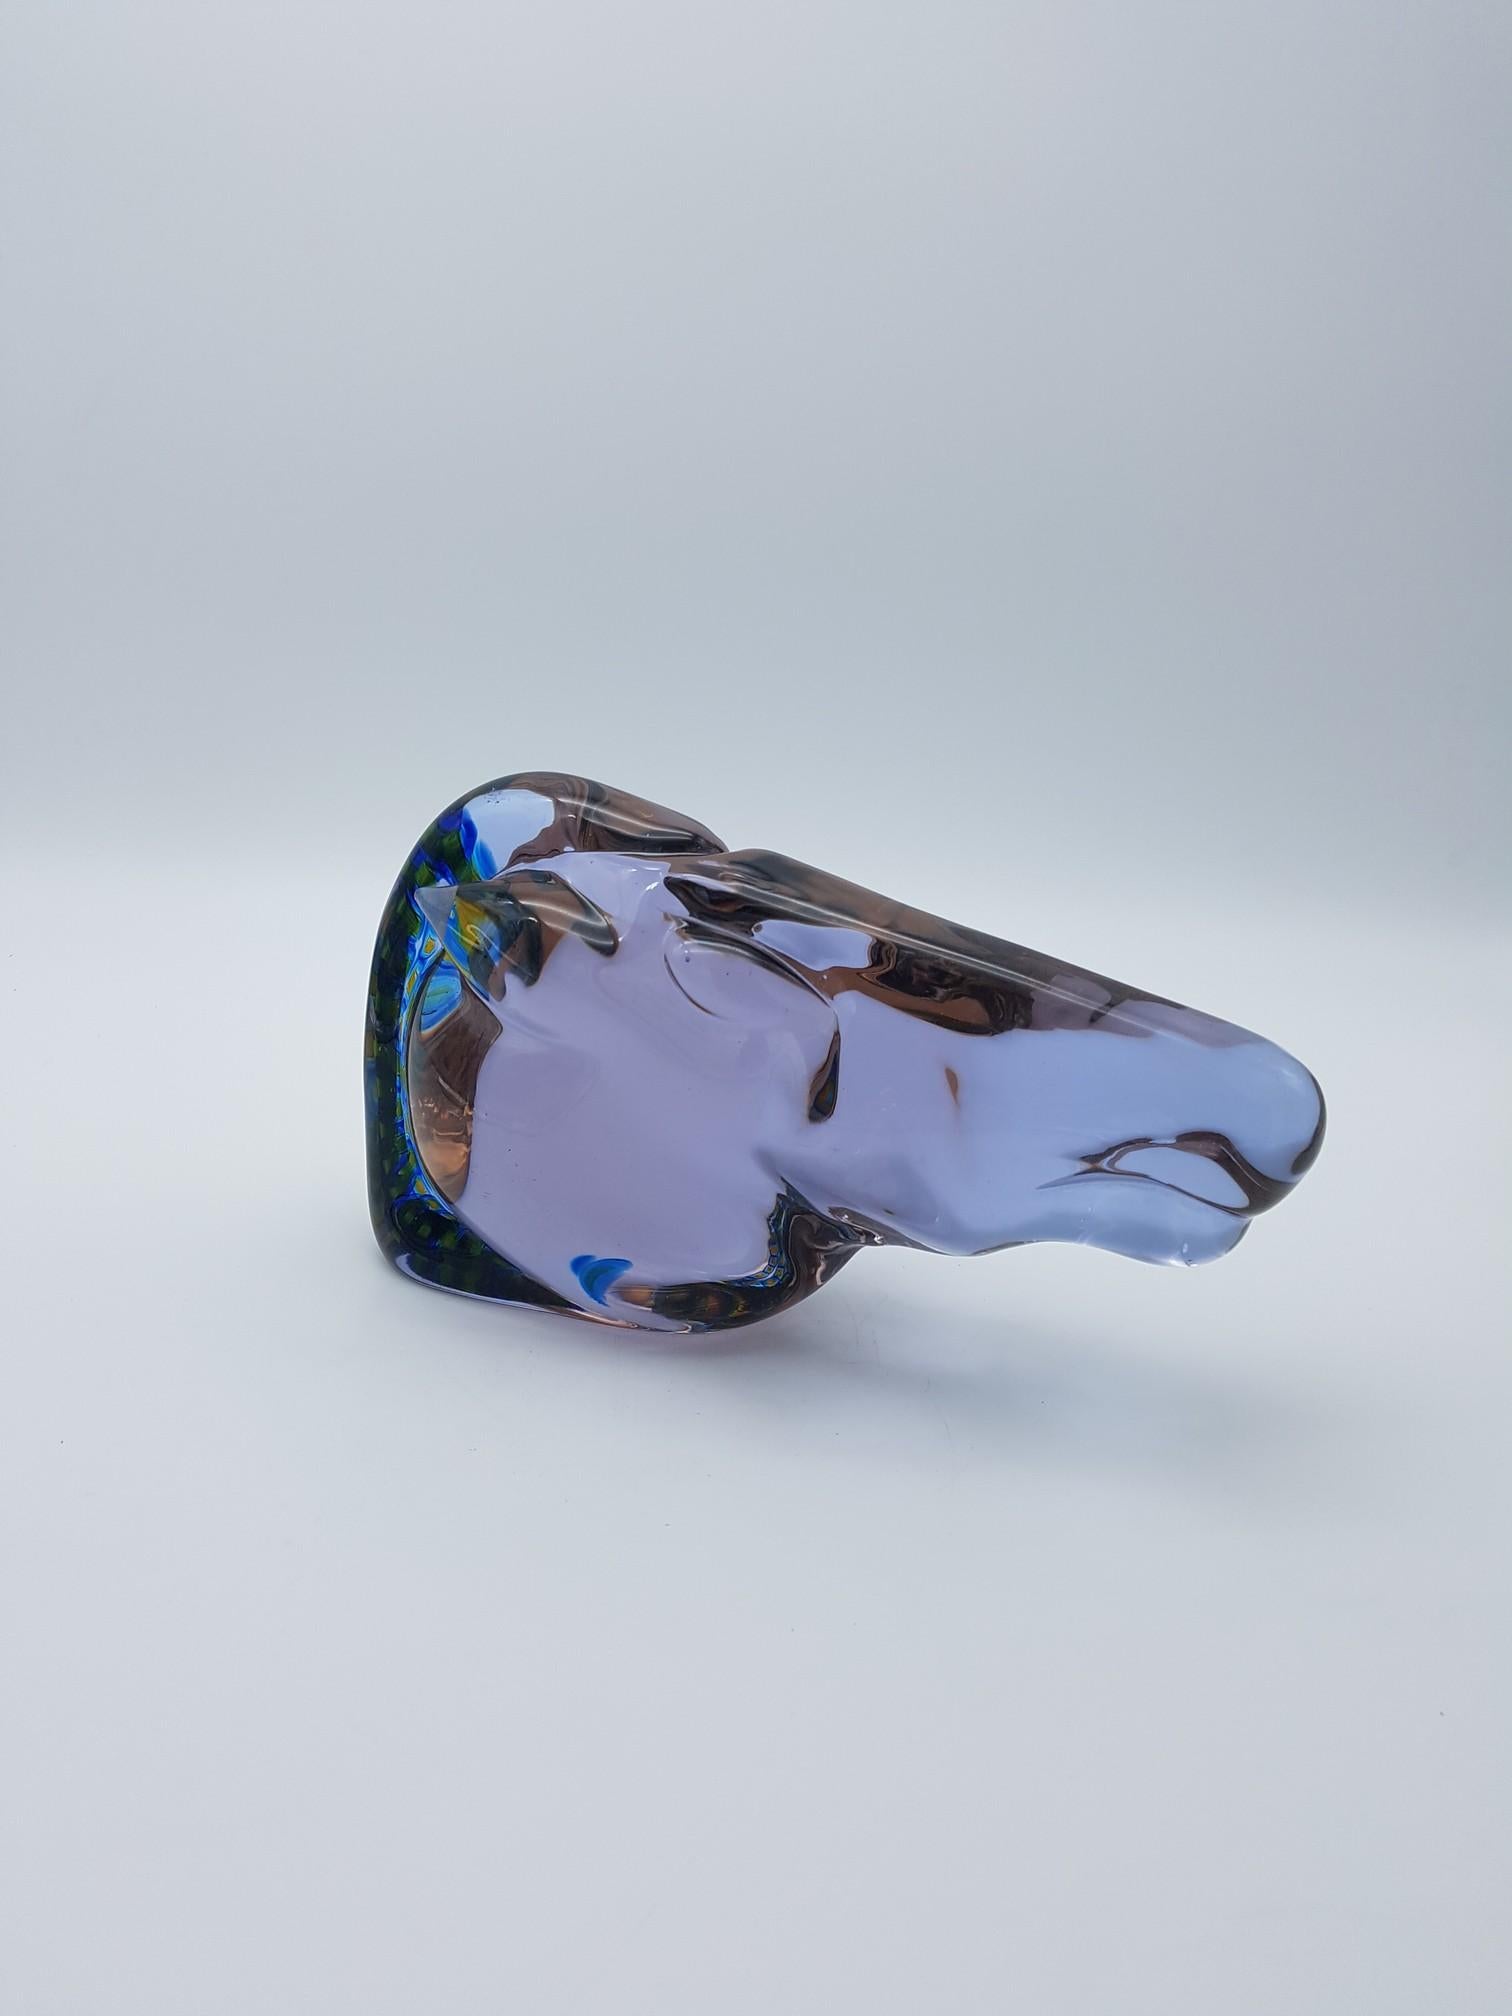 Vintage Murano Glass Horse Head by Ermanno Nason at Cenedese, Early 1970s For Sale 2